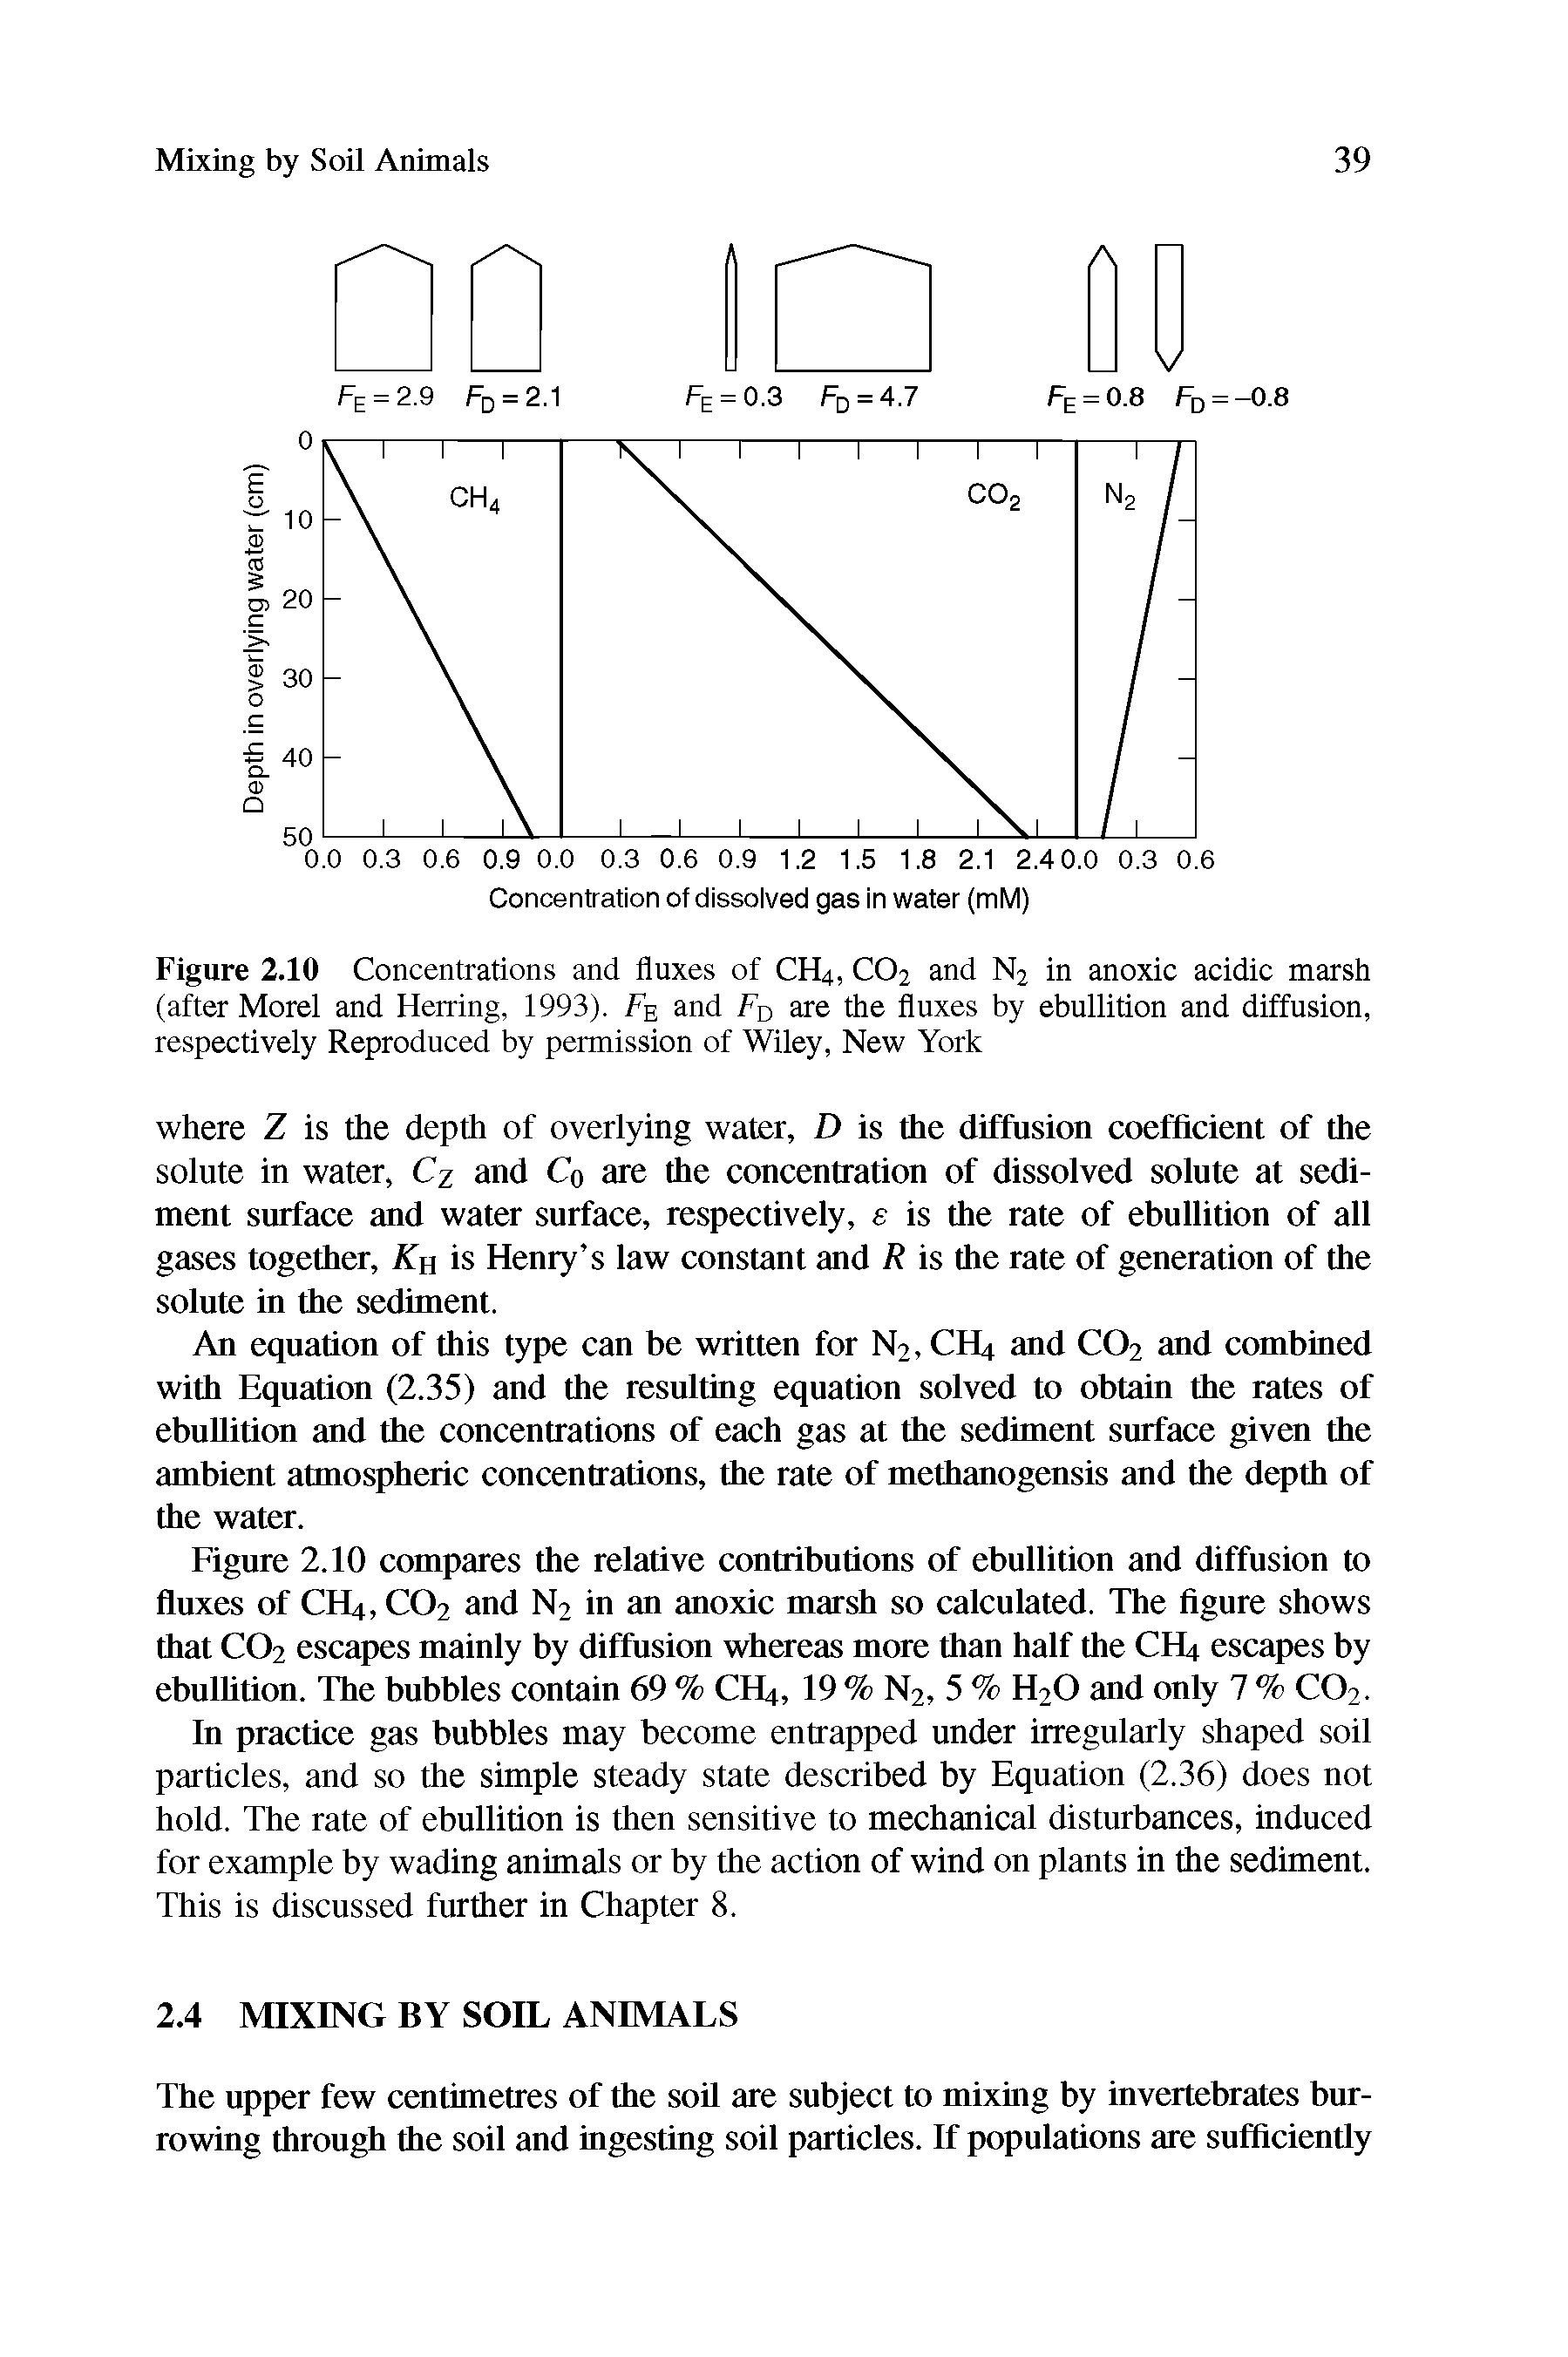 Figure 2.10 Concentrations and fluxes of CH4, CO2 and N2 in anoxic acidic marsh (after Morel and Herring, 1993). Fe and Fd are the fluxes by ebullition and diffusion, respectively Reproduced by permission of Wiley, New York...